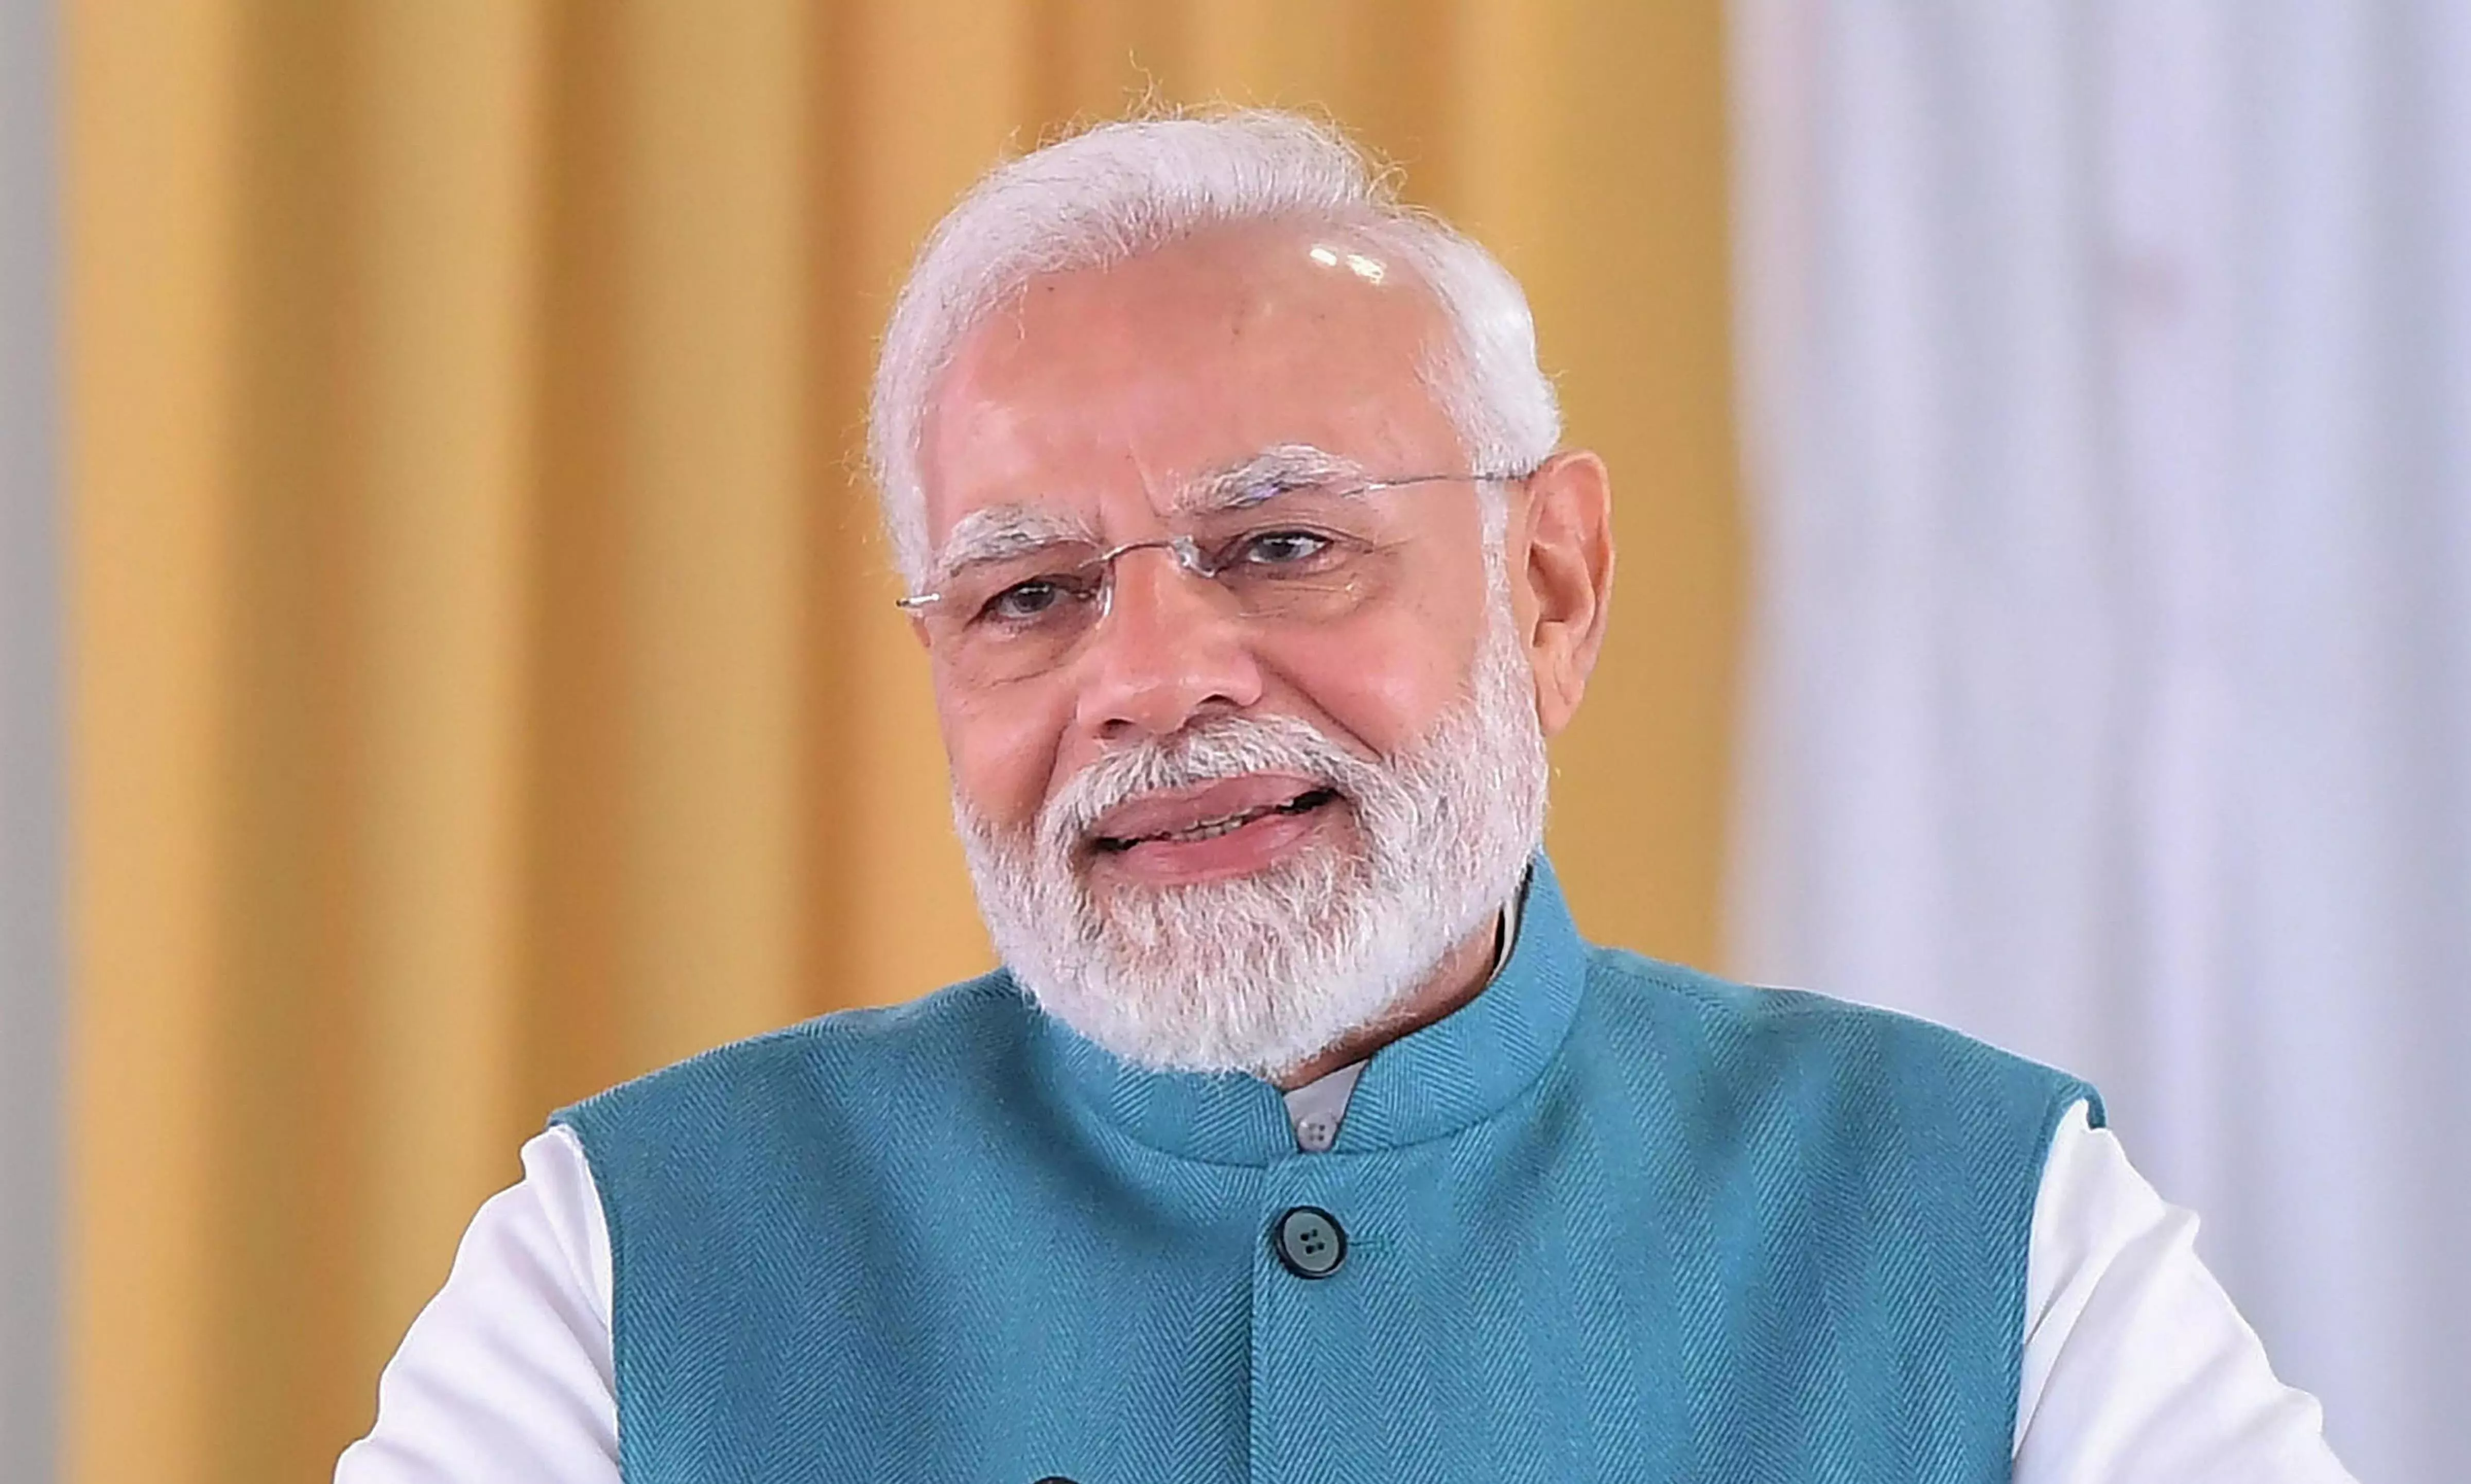 Your efforts will shape the future: PM to civil services aspirants